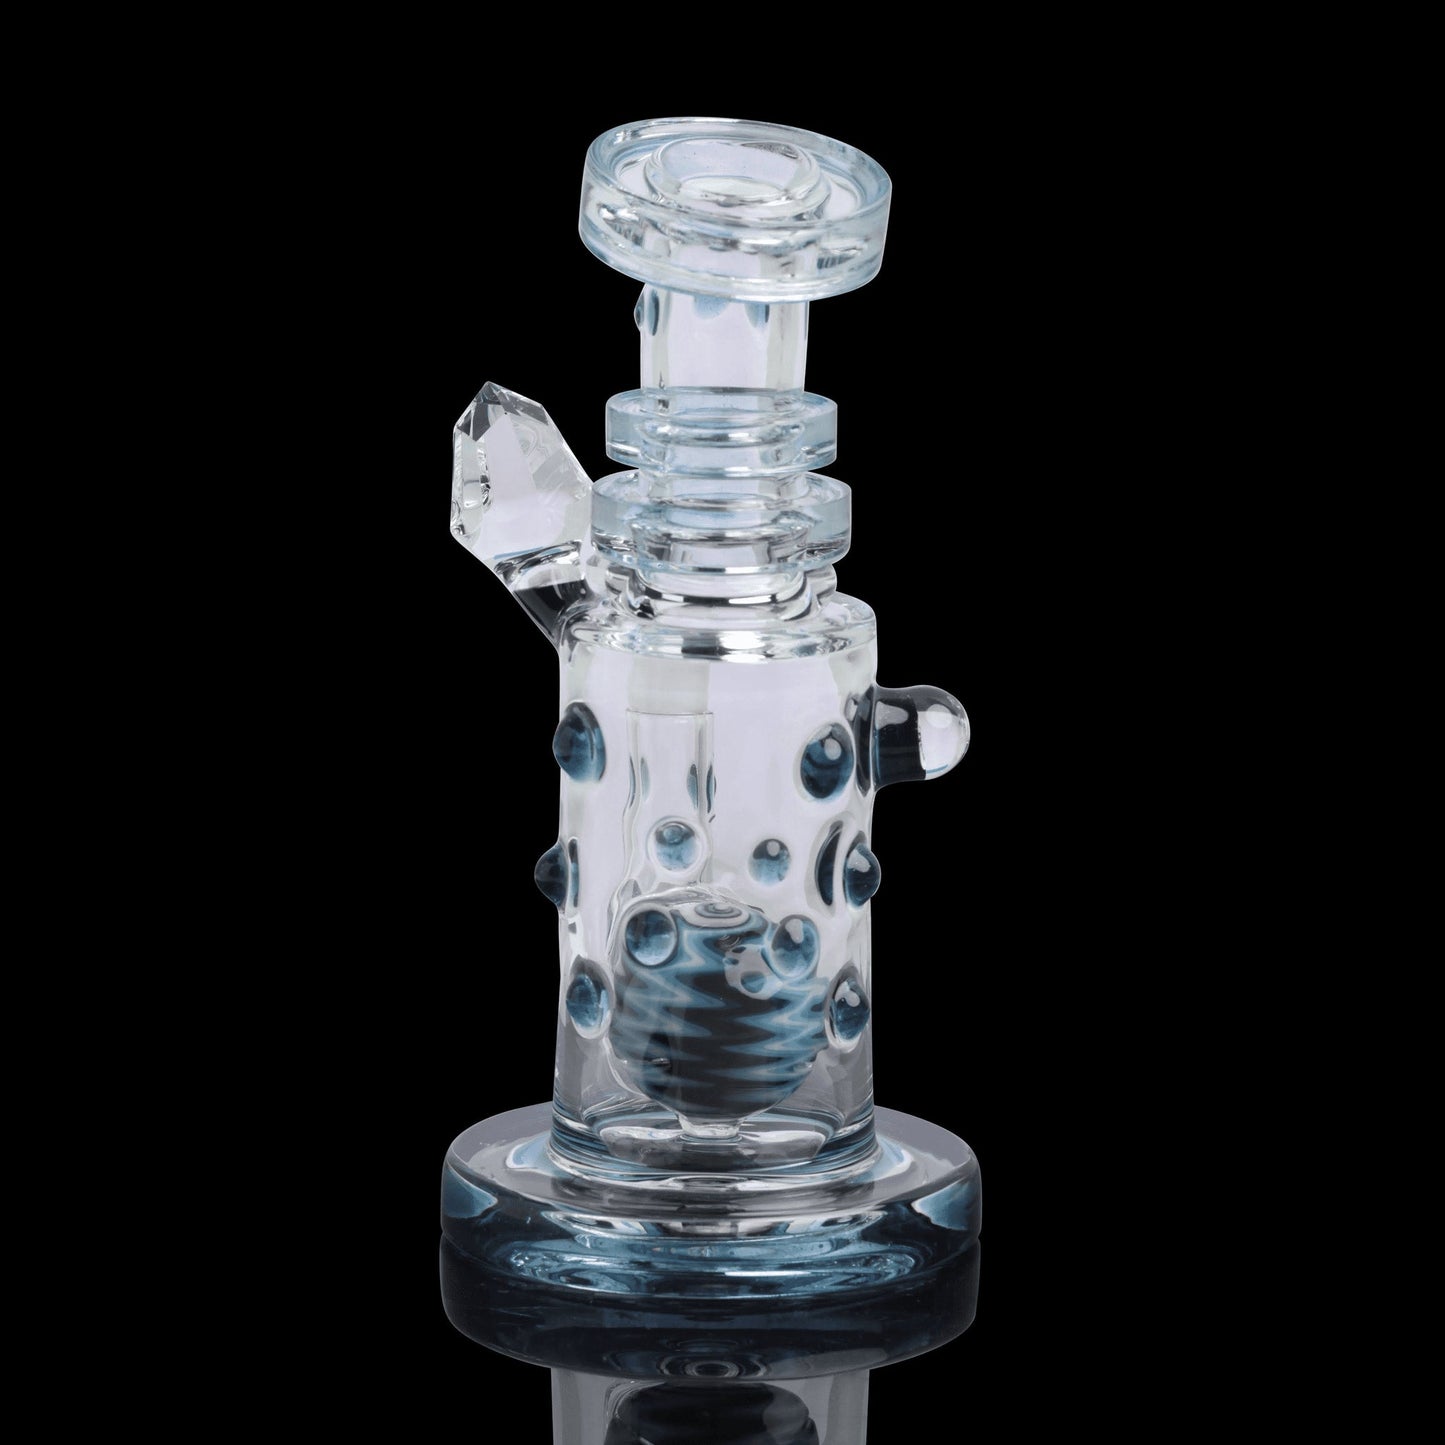 hand-blown design of the Rainbow Rig (E) by Chris Hubbard